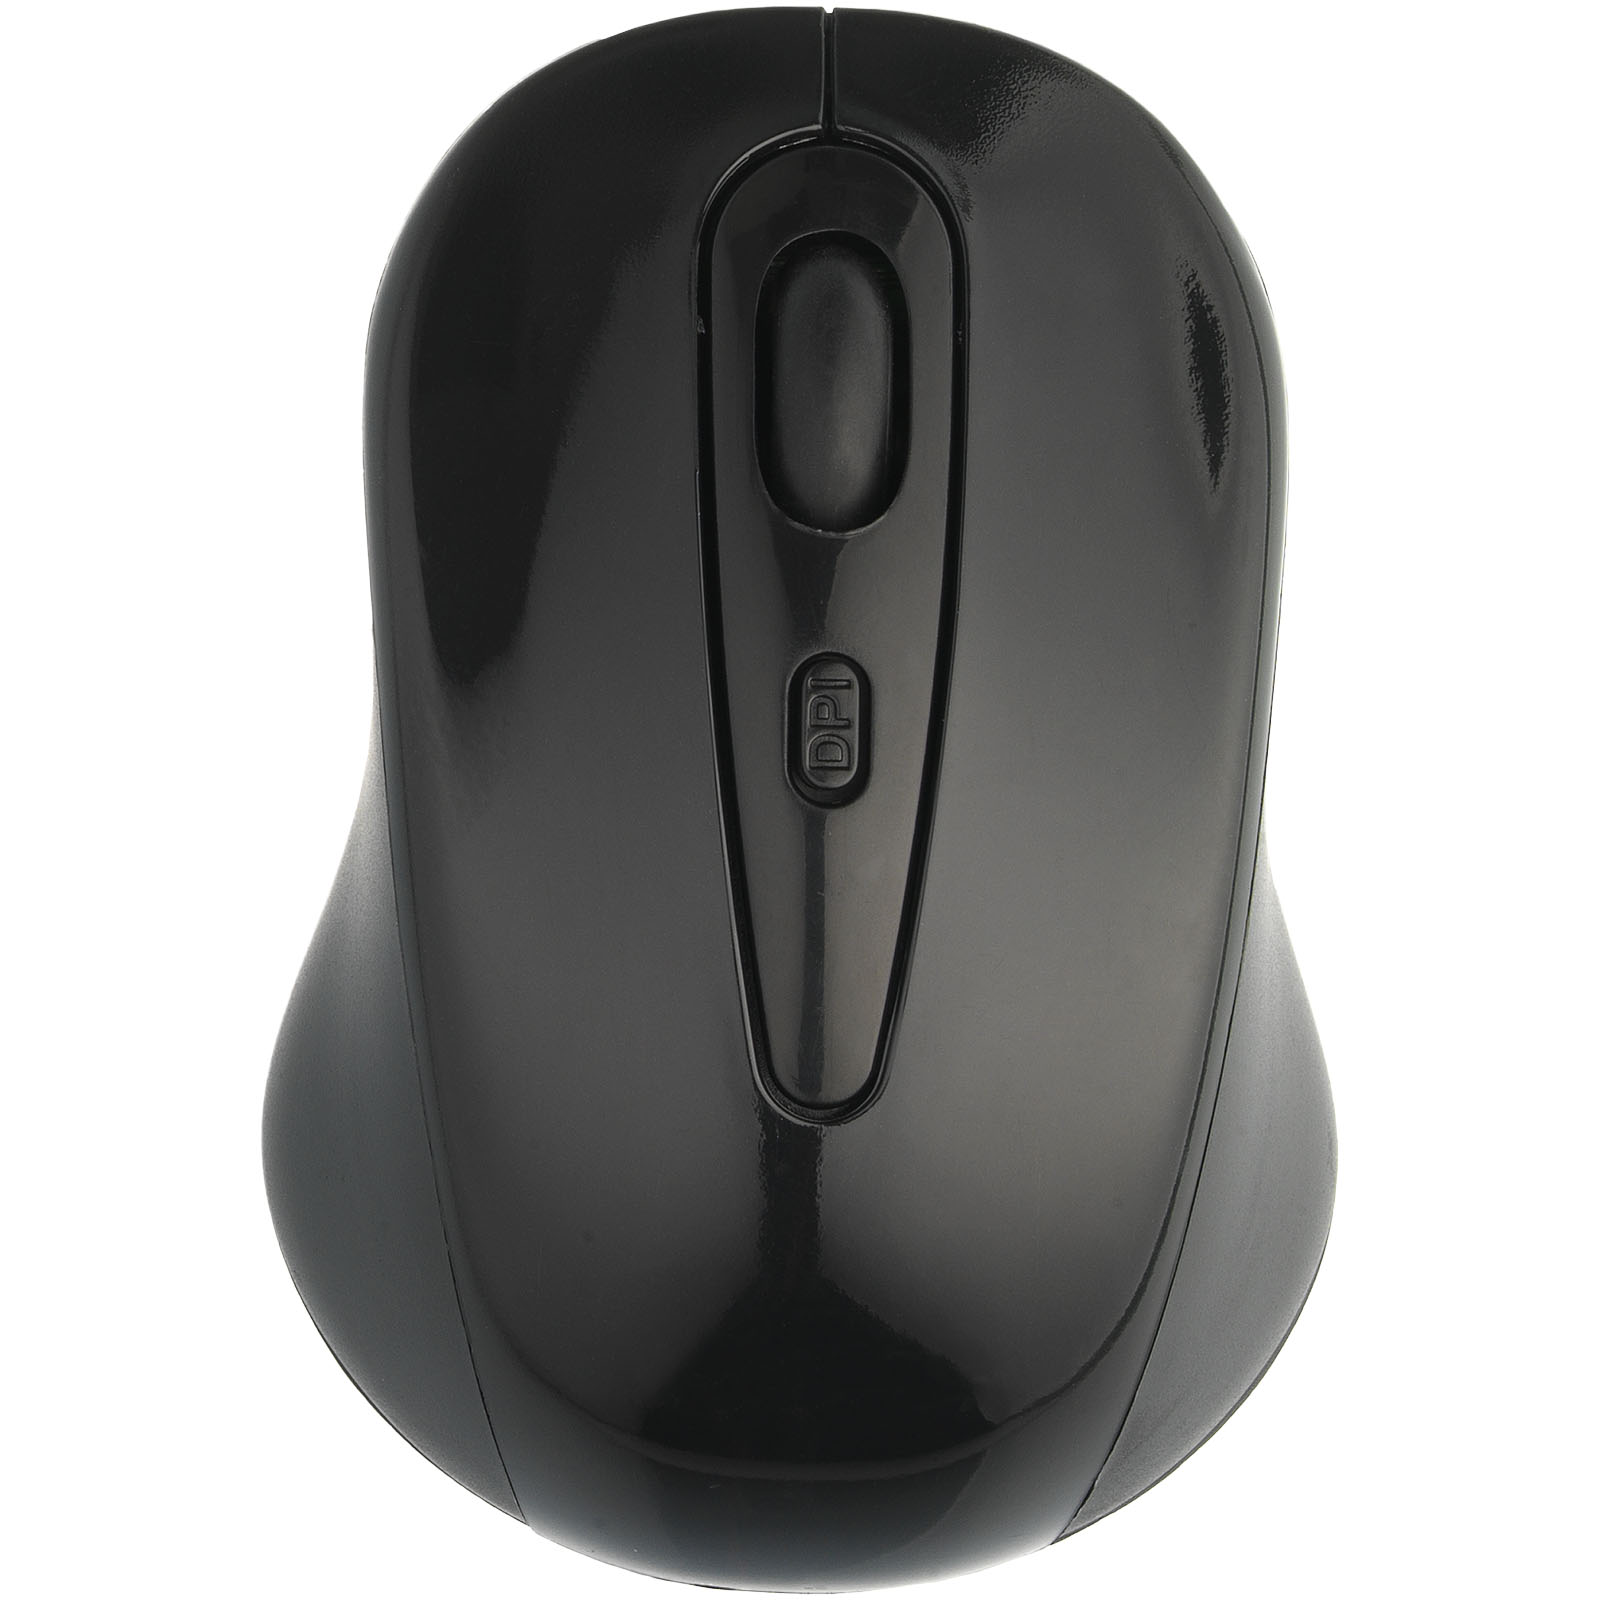 Advertising Computer Accessories - Stanford wireless mouse - 1